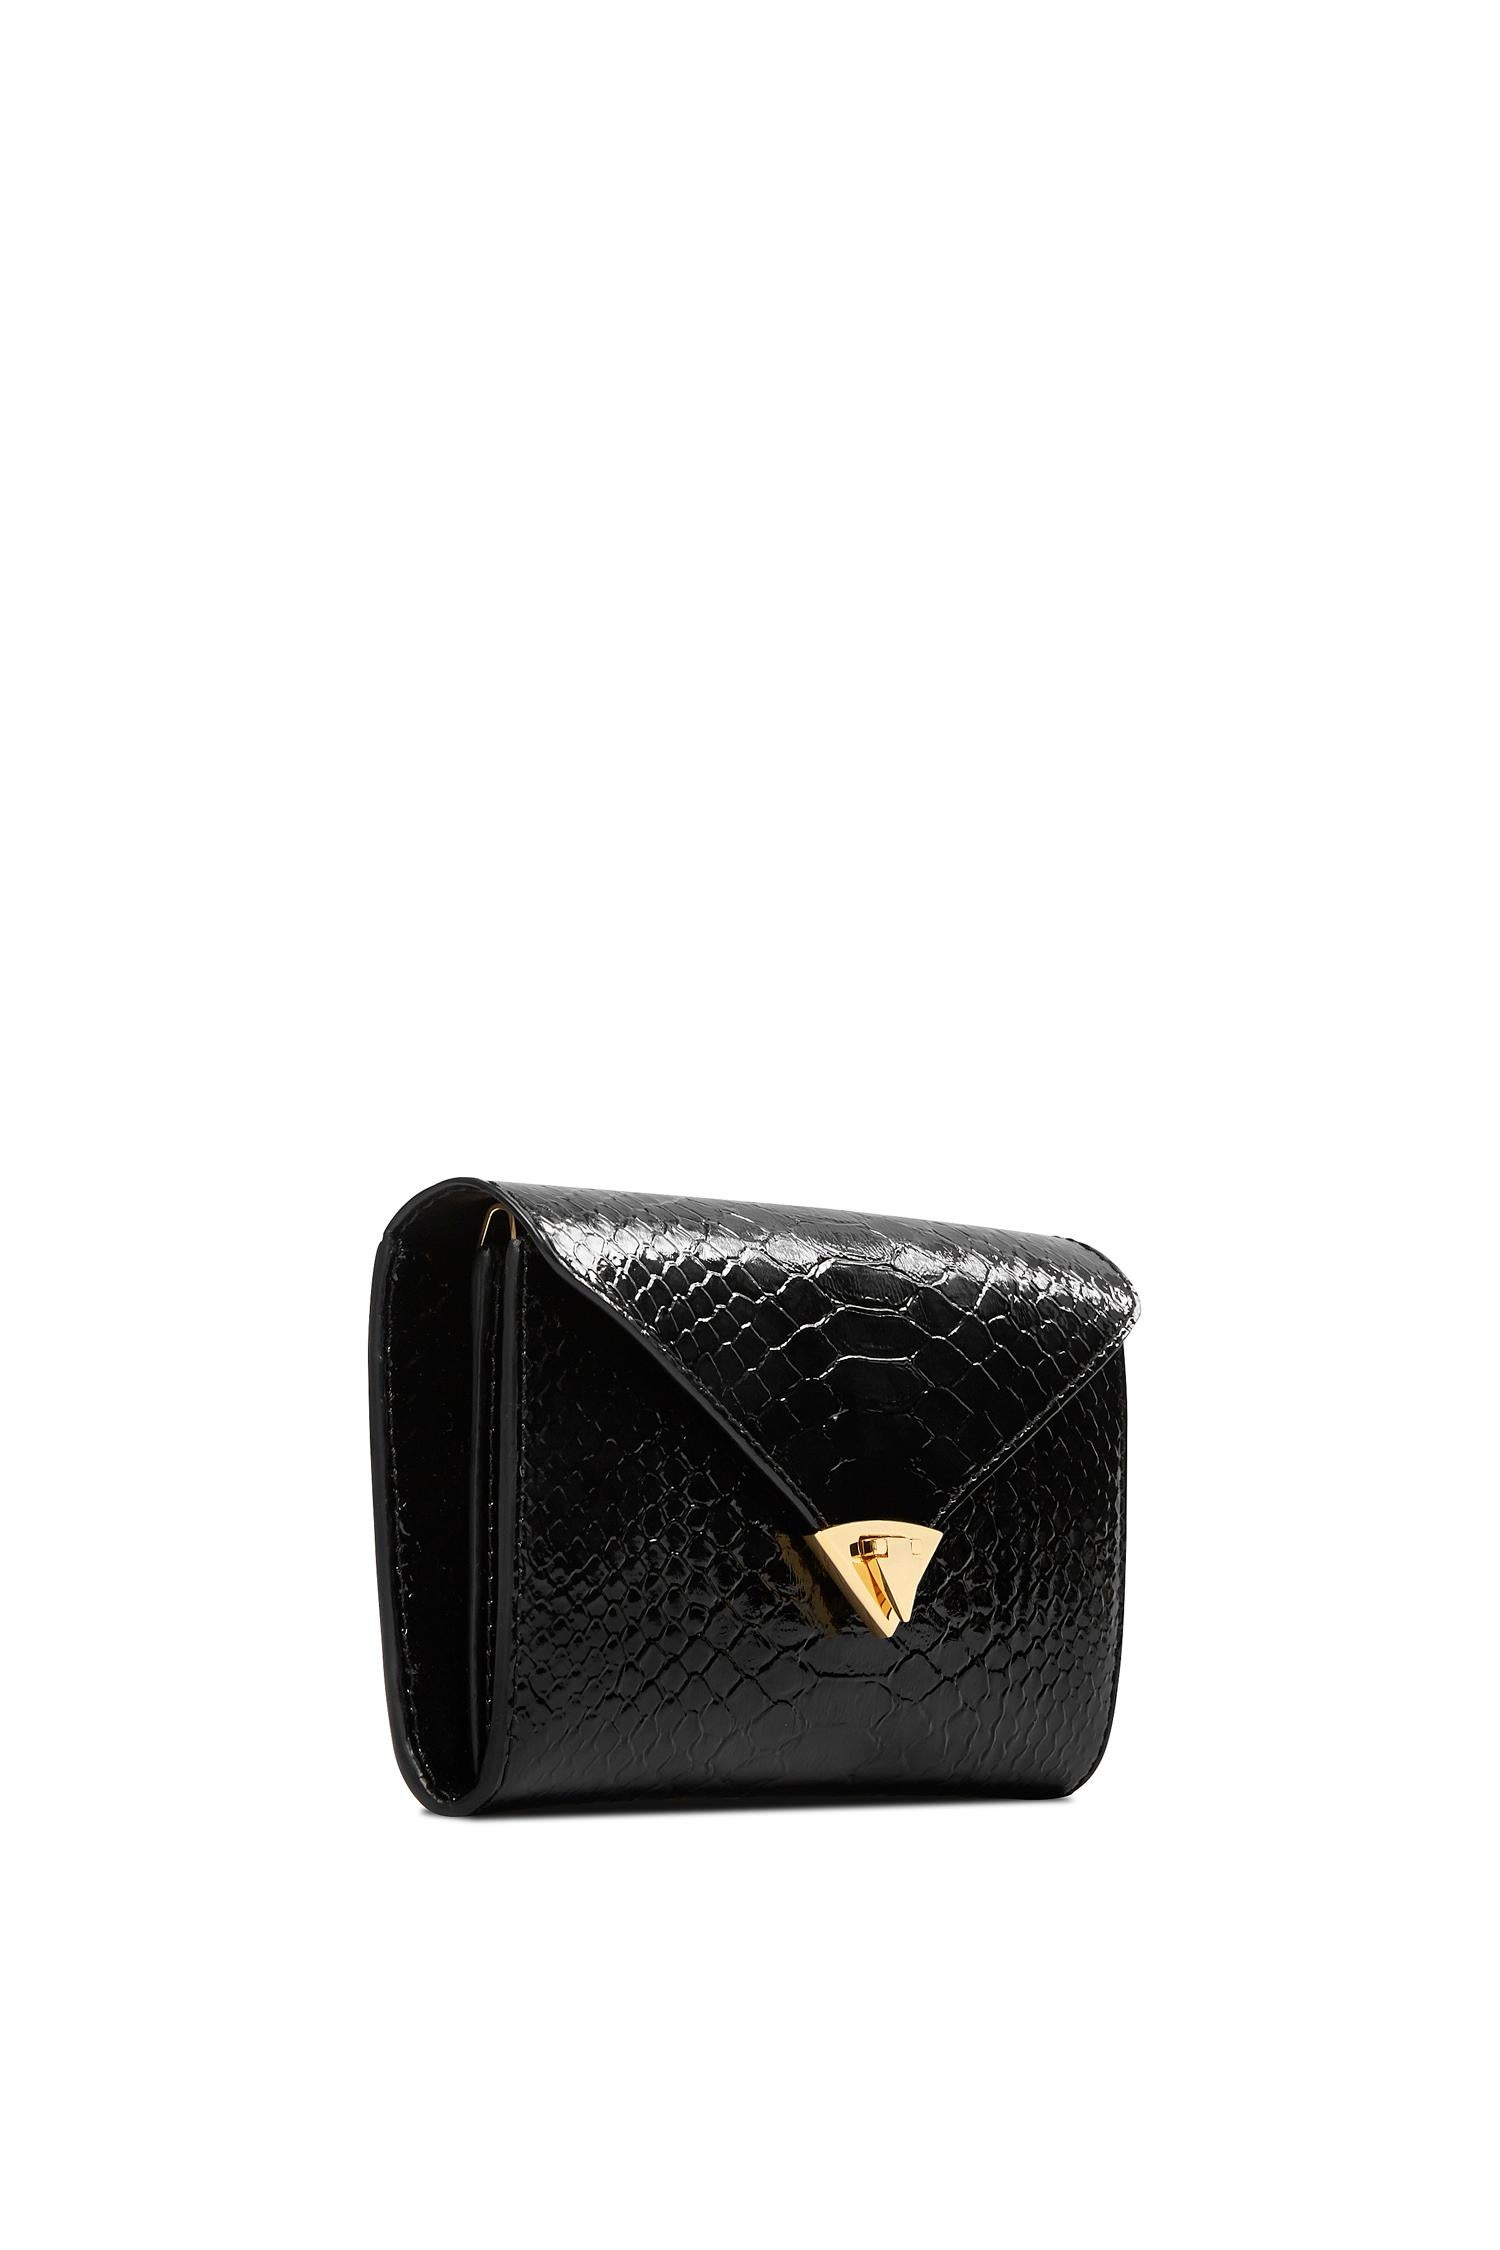 The Alex Wallet Noir Glossy Python Gold Hardware is designed with a detachable gold cross-body chain, interior credit card slots and a pinecone pull zip pocket. It features our signature spear-lock closure and Thayer blue leather lining.

Size: One